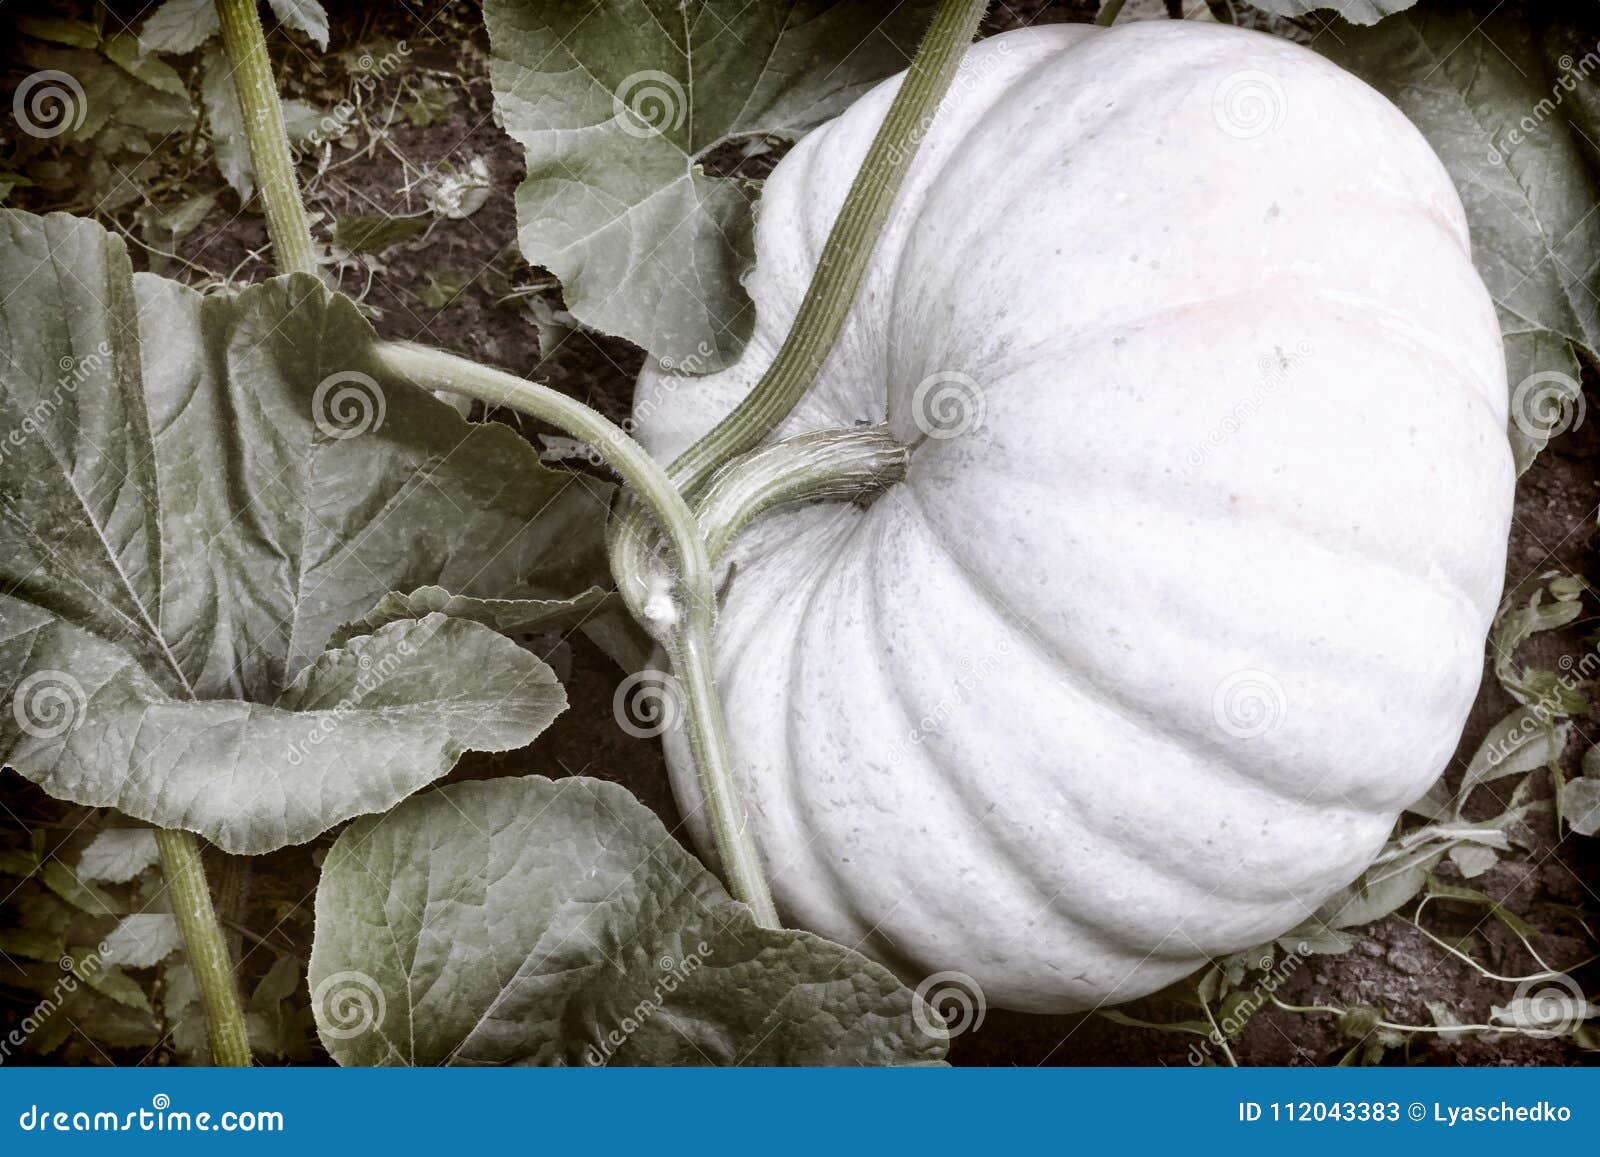 Pumpkin Grows in the Garden among Green Leaves. Stock Image - Image of ...